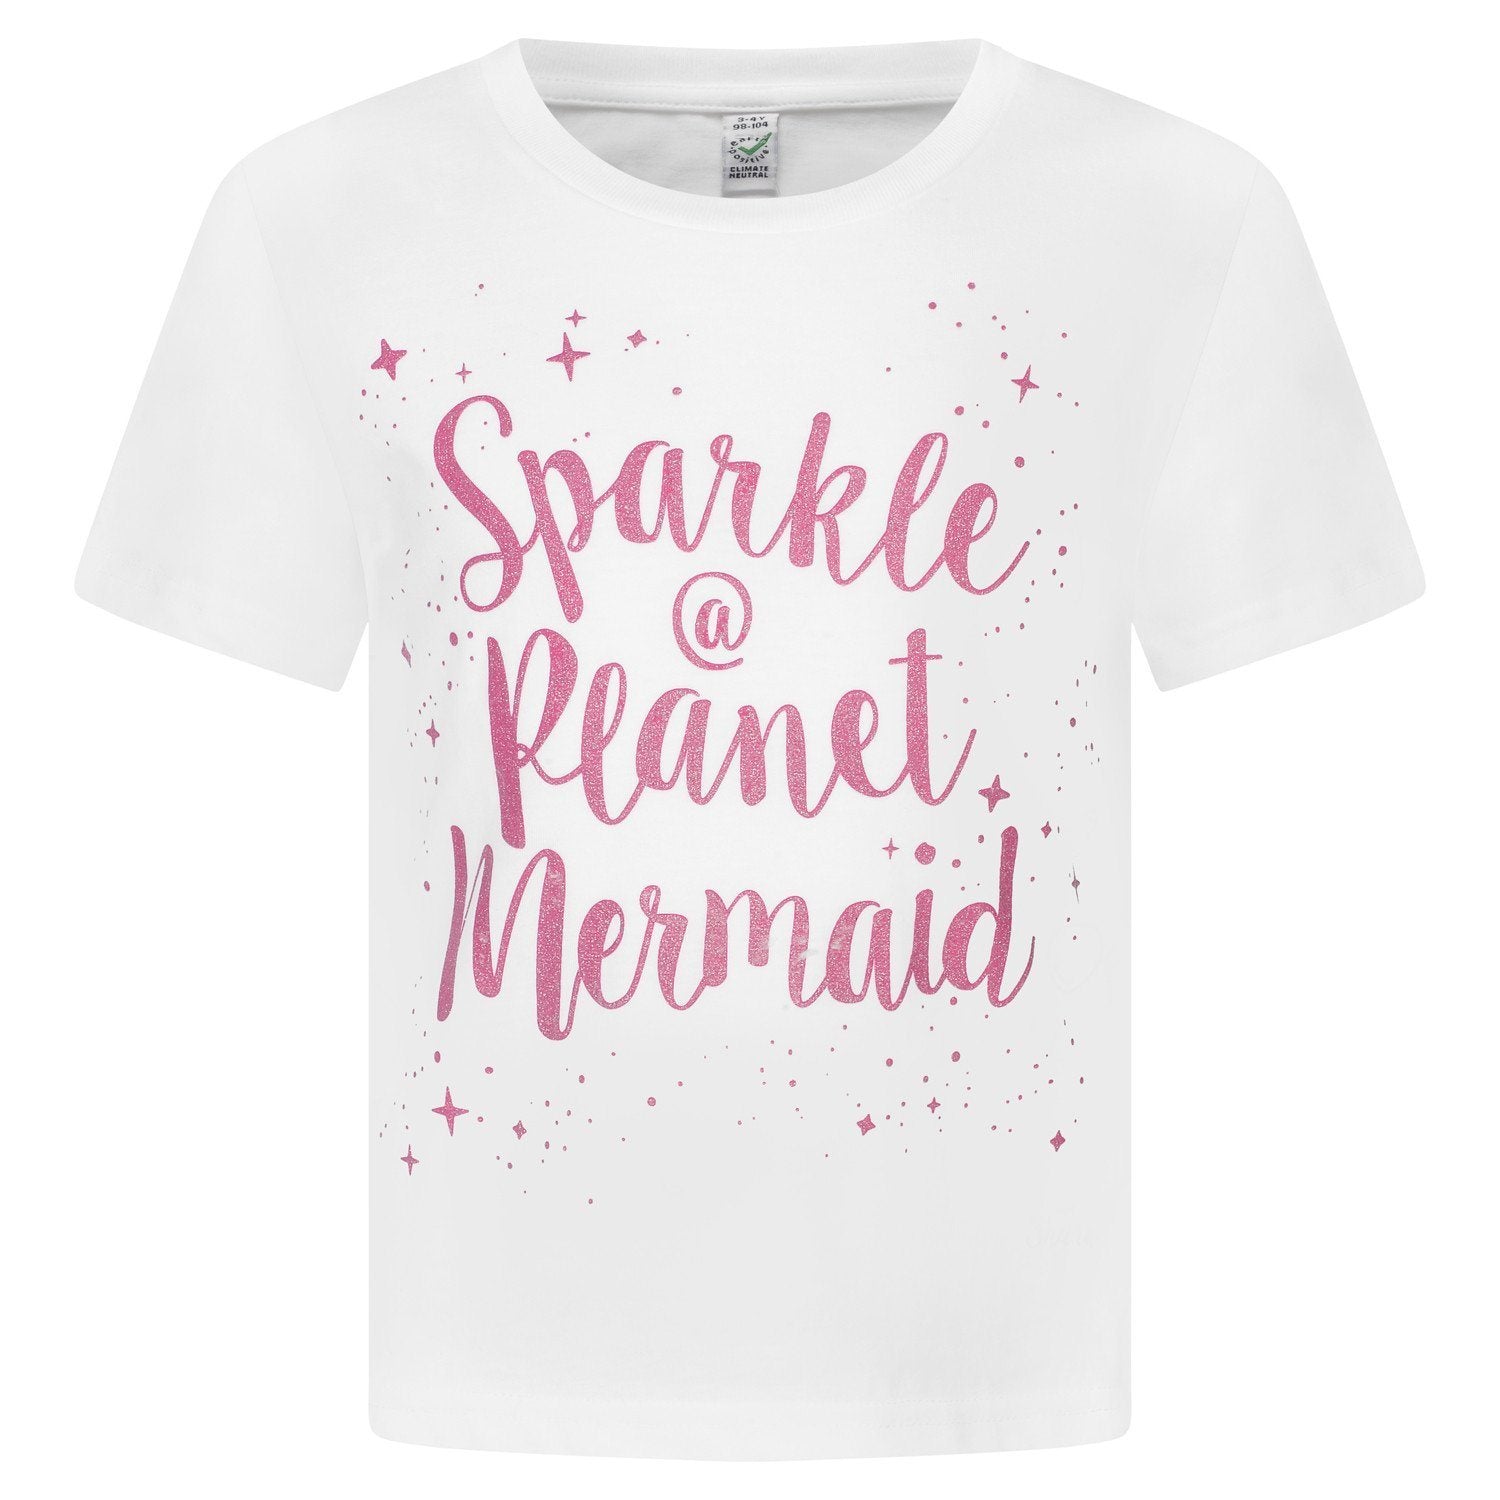 "Sparkle @ Planet Mermaid" Girls White Cotton T-shirt With Glitter Print - Front